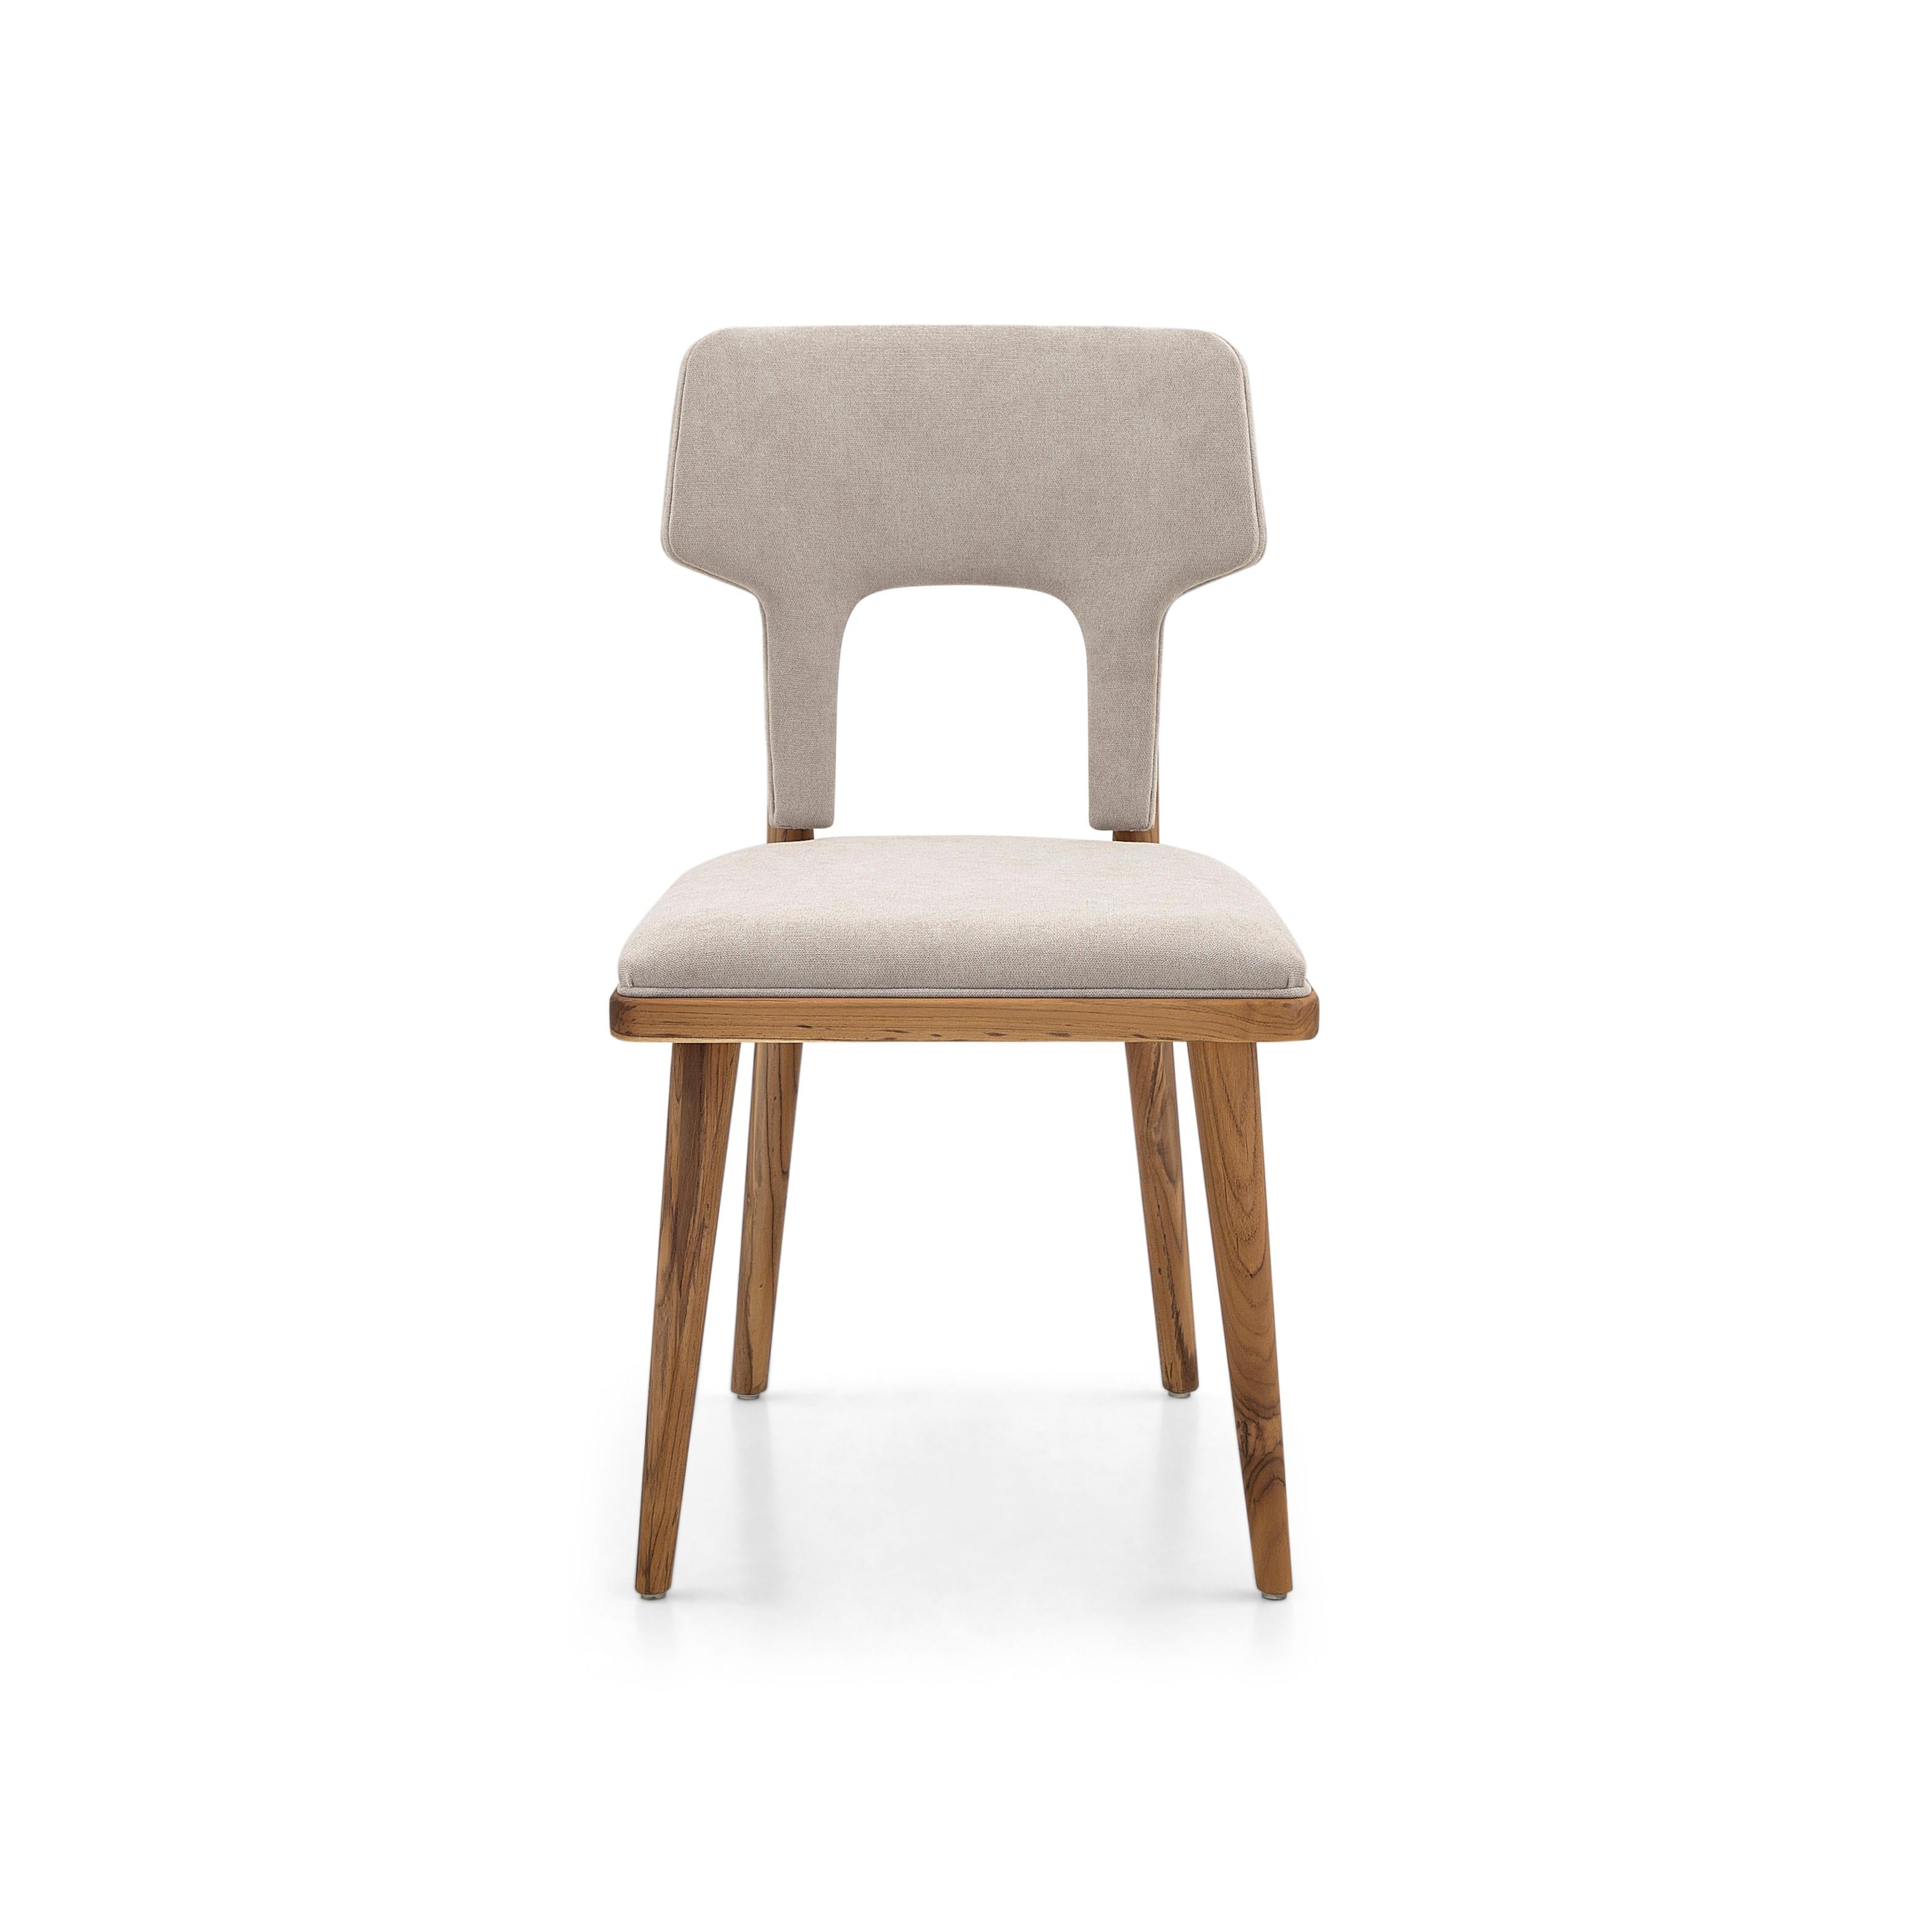 Brazilian Fork Dining Chair in Light Beige Fabric and Teak Wood Finish, Set of 2 For Sale